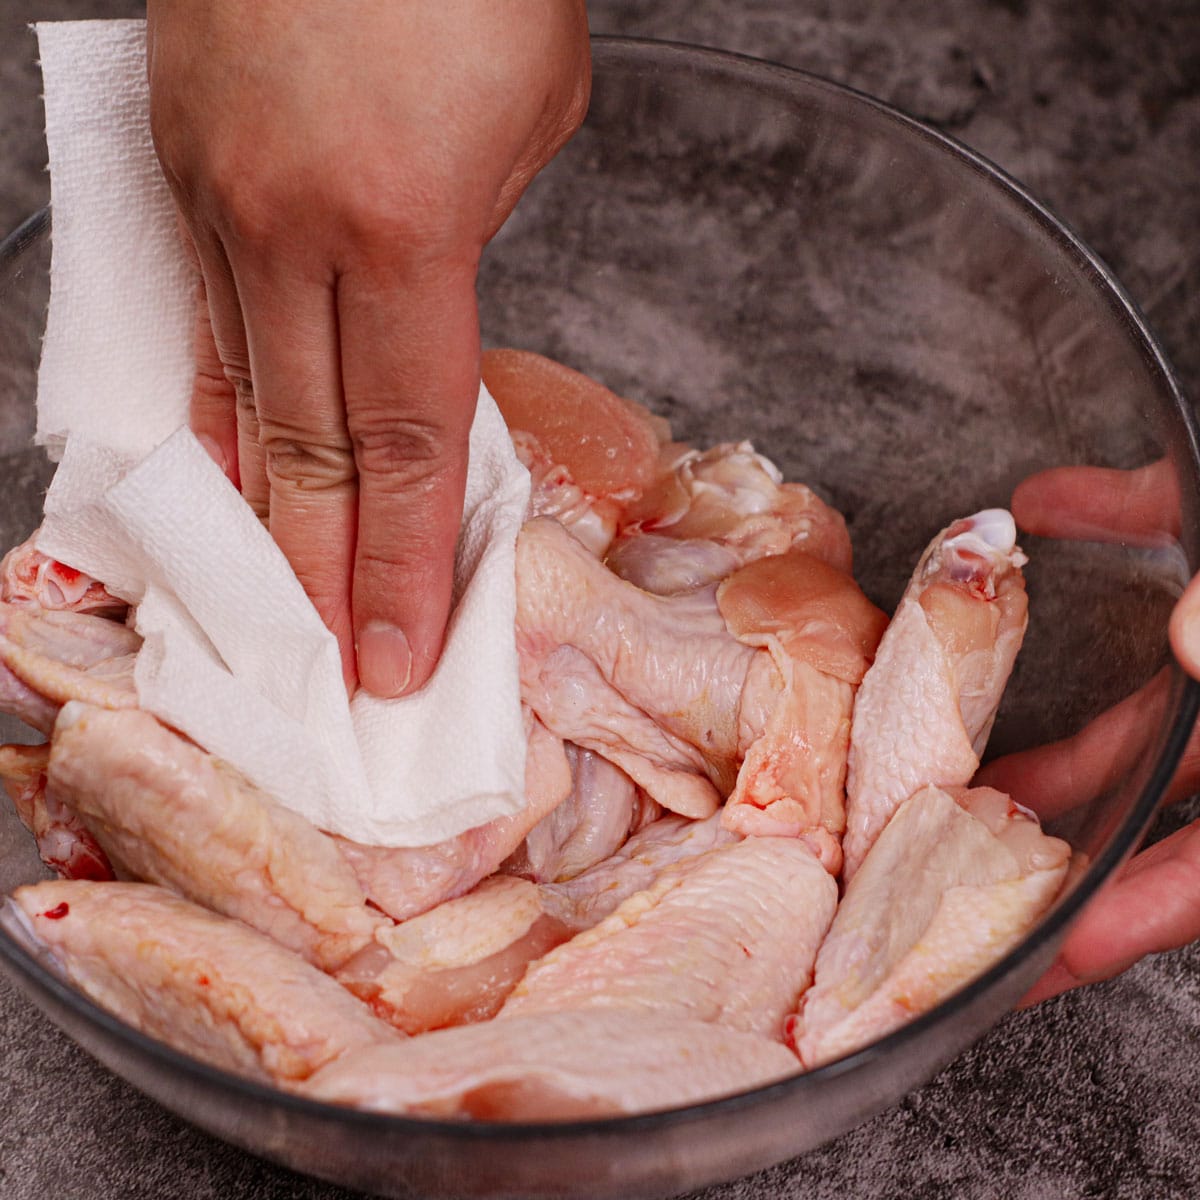 Patting chicken wings dry with a paper towel